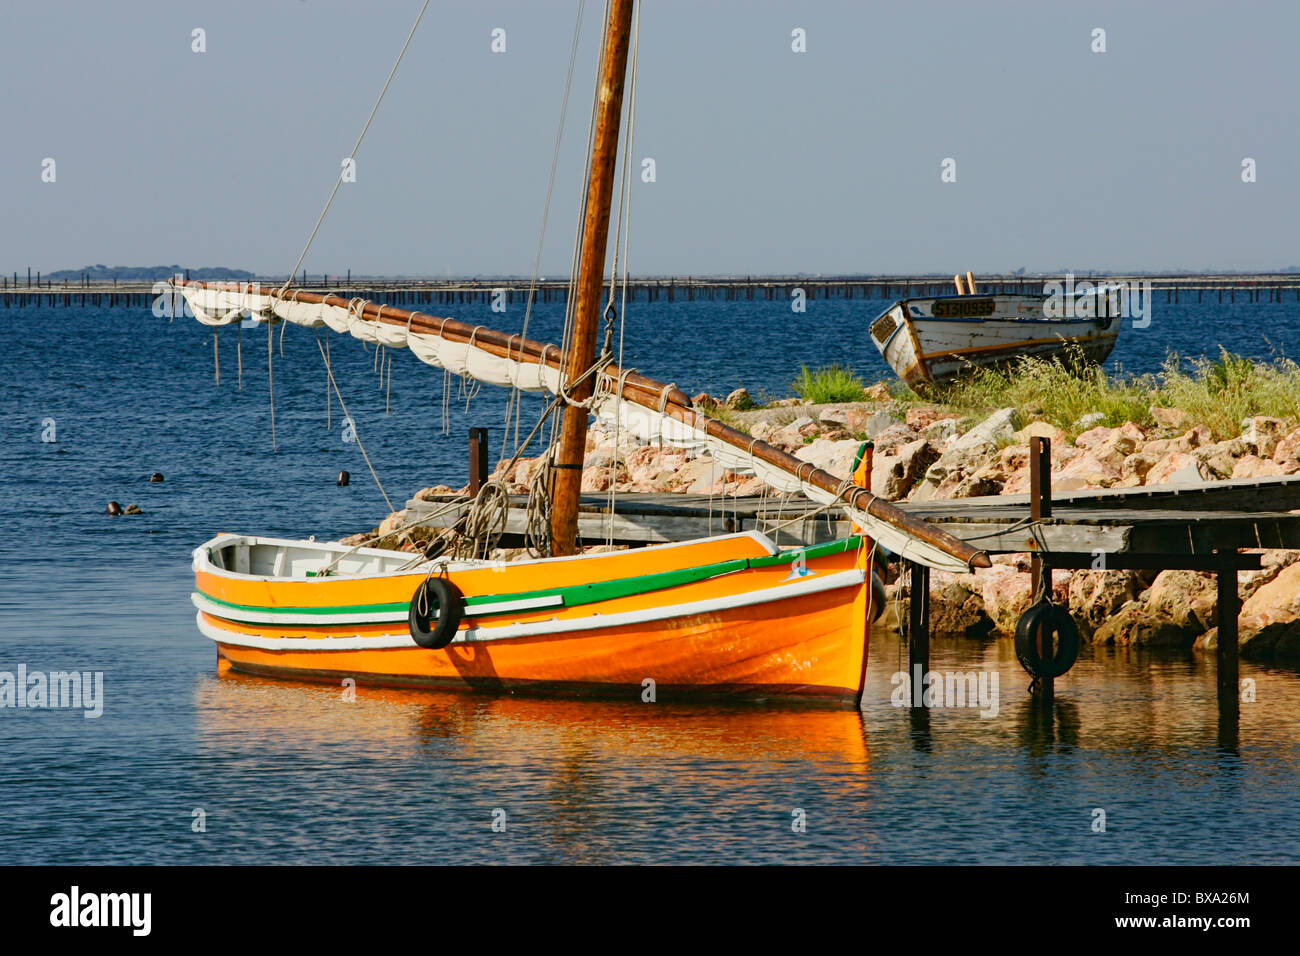 A old sailing boat Stock Photo